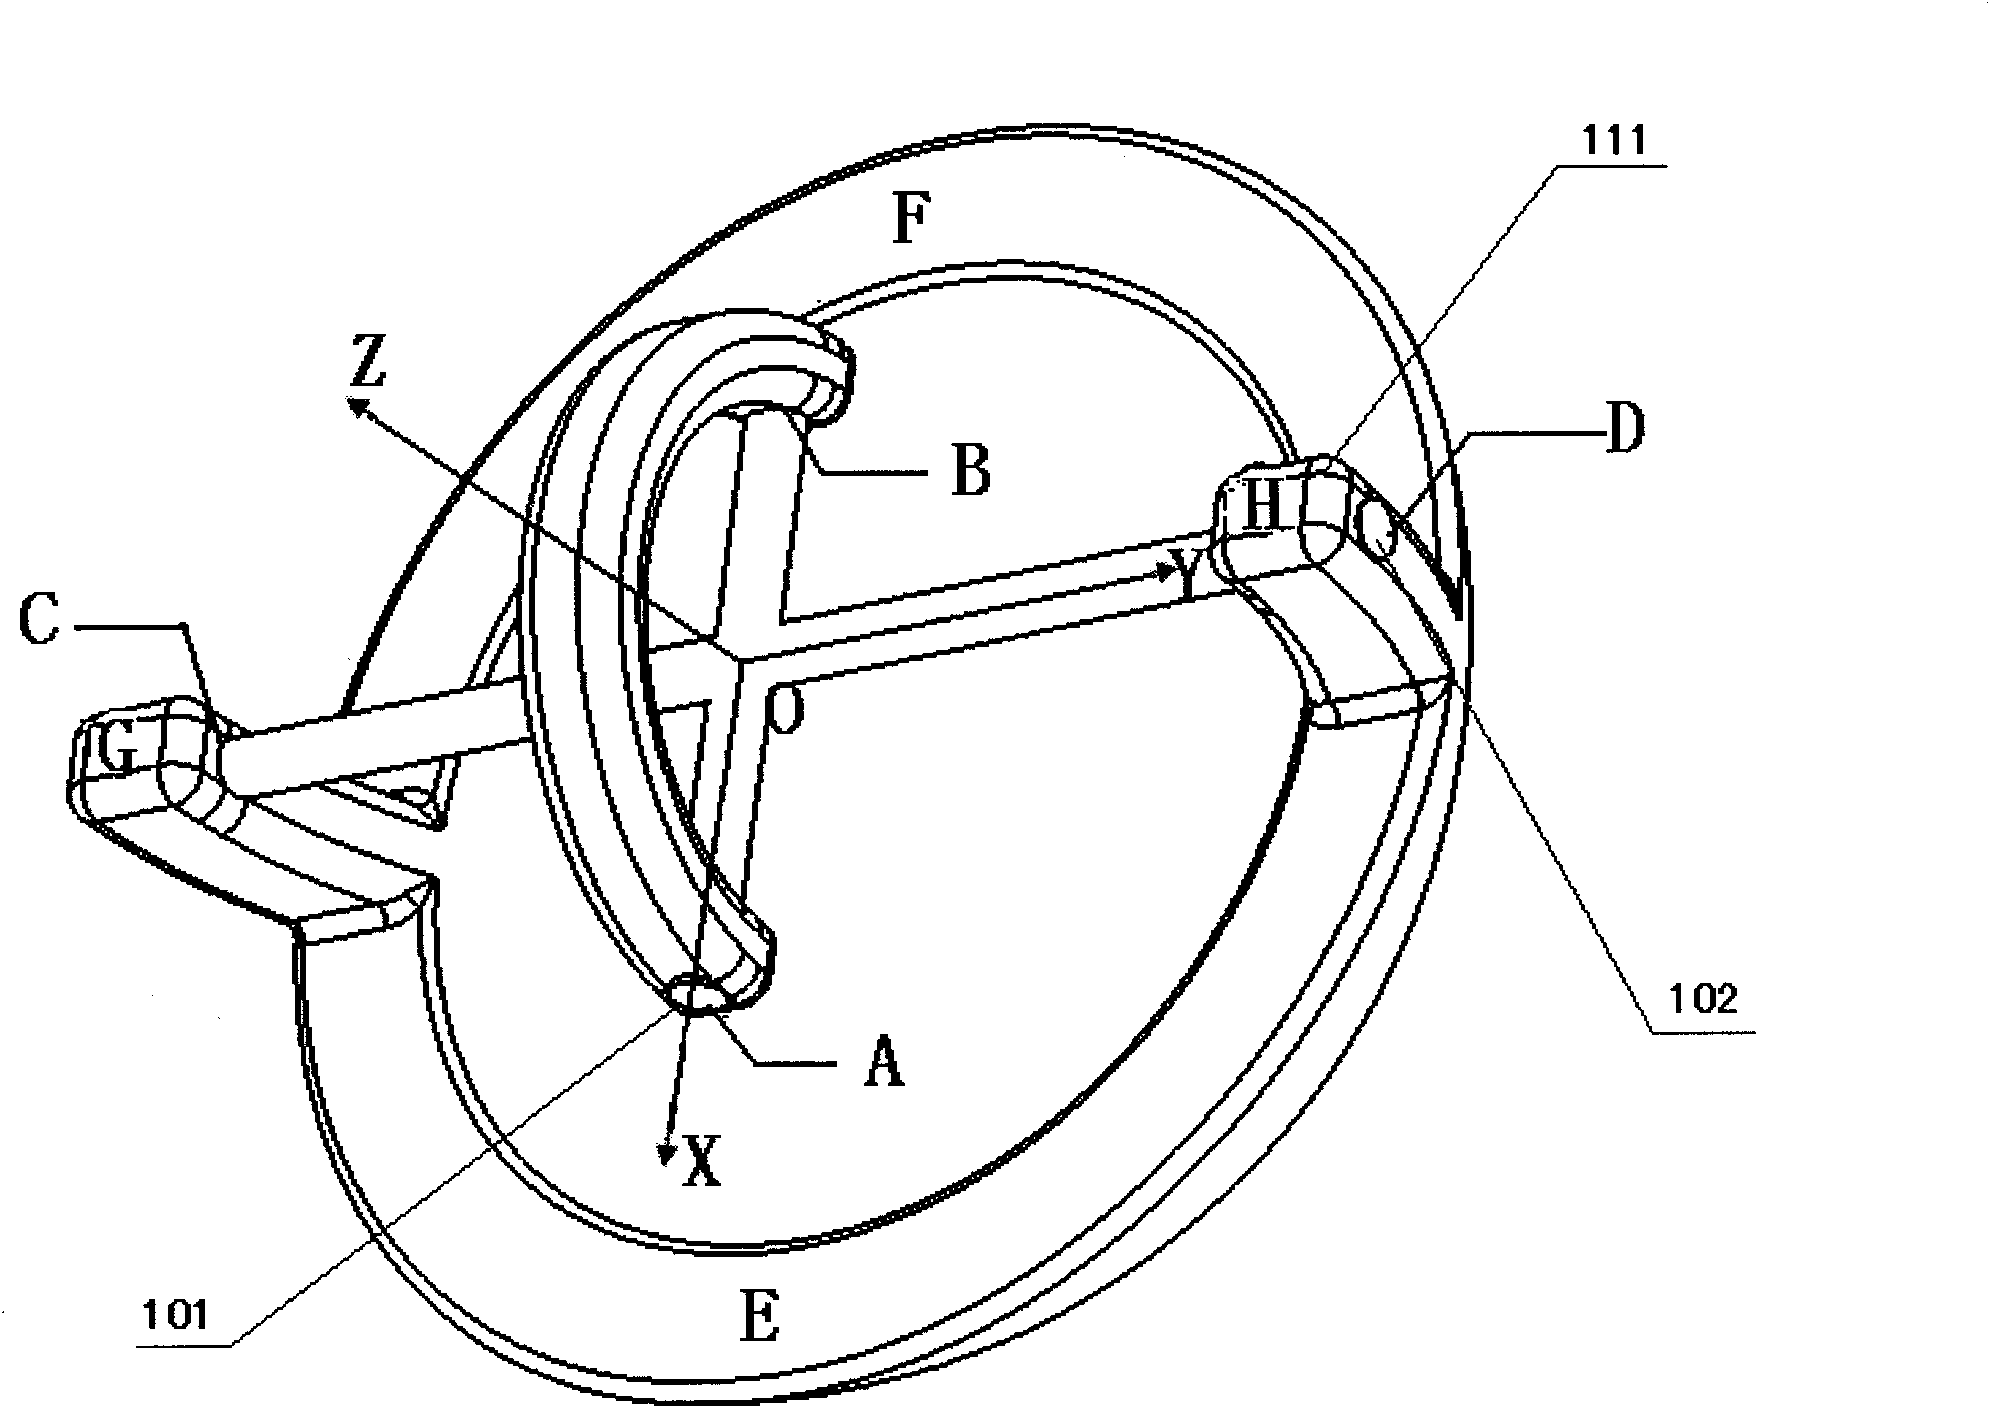 Wind tunnel model supporting device